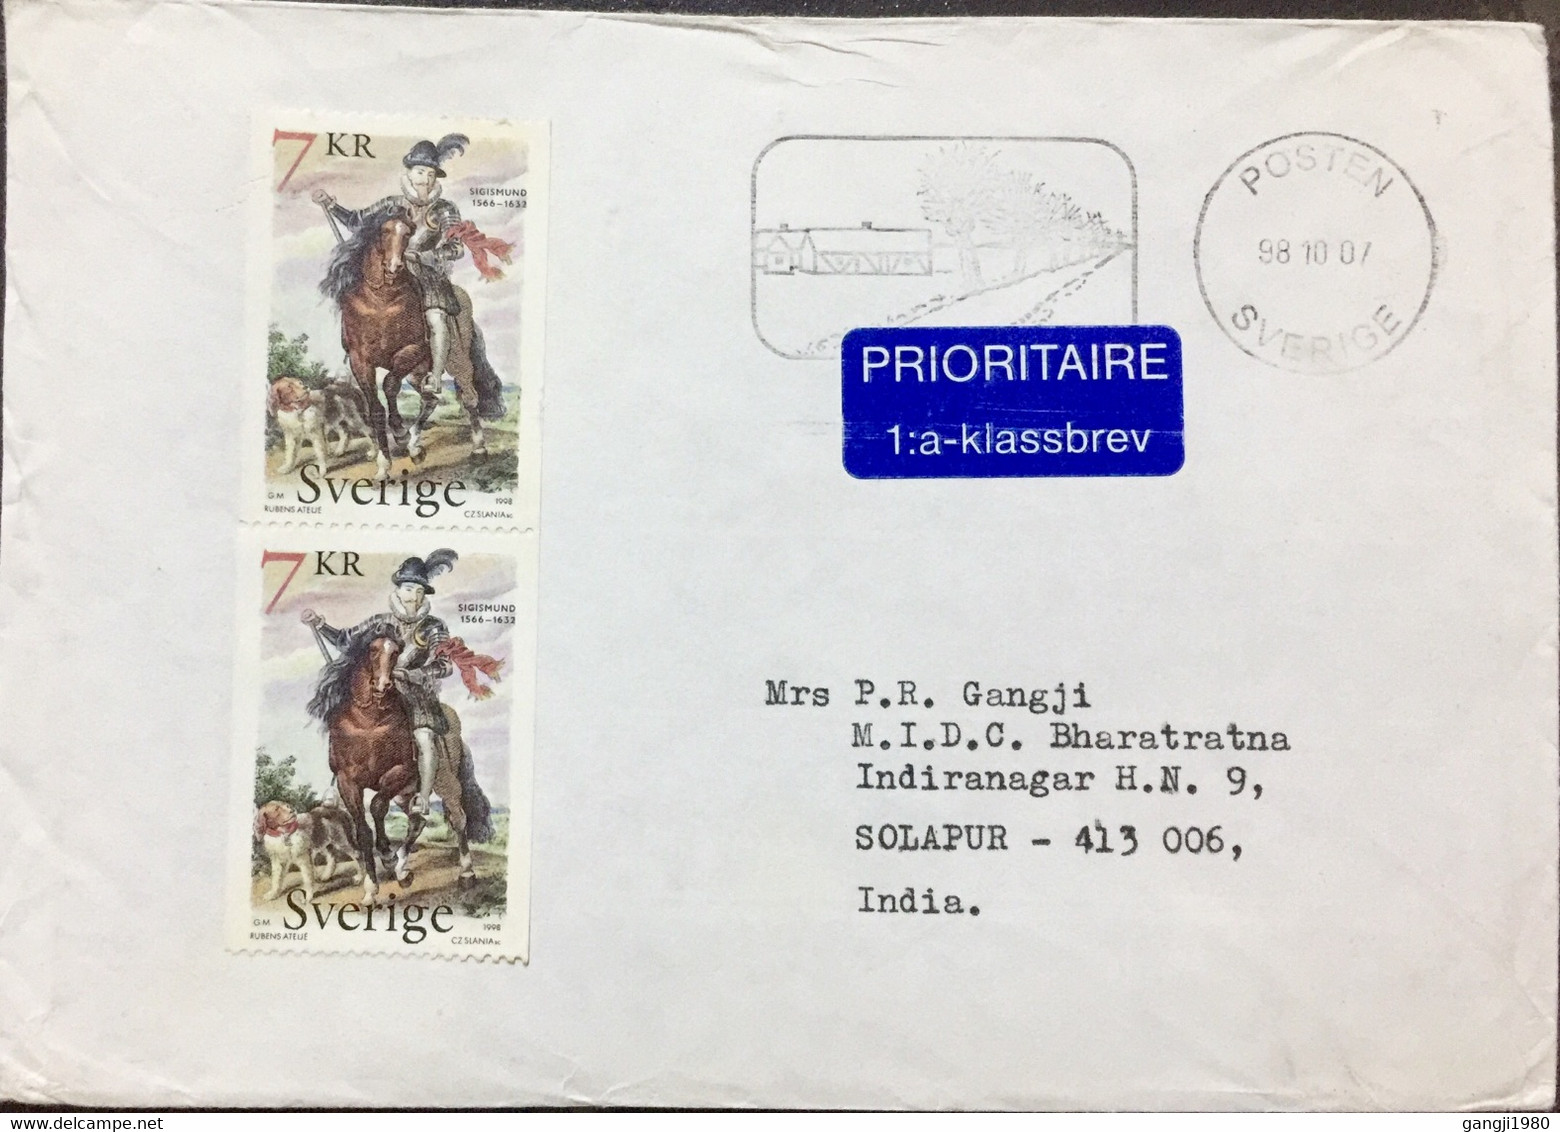 SWEDEN 2007, AIRMAIL COVER USED TO INDIA,POSTEN PICTURAL SLOGAN,CANCELLATION!!! SIGISMUND 1998 STAMPS PAIR - Covers & Documents